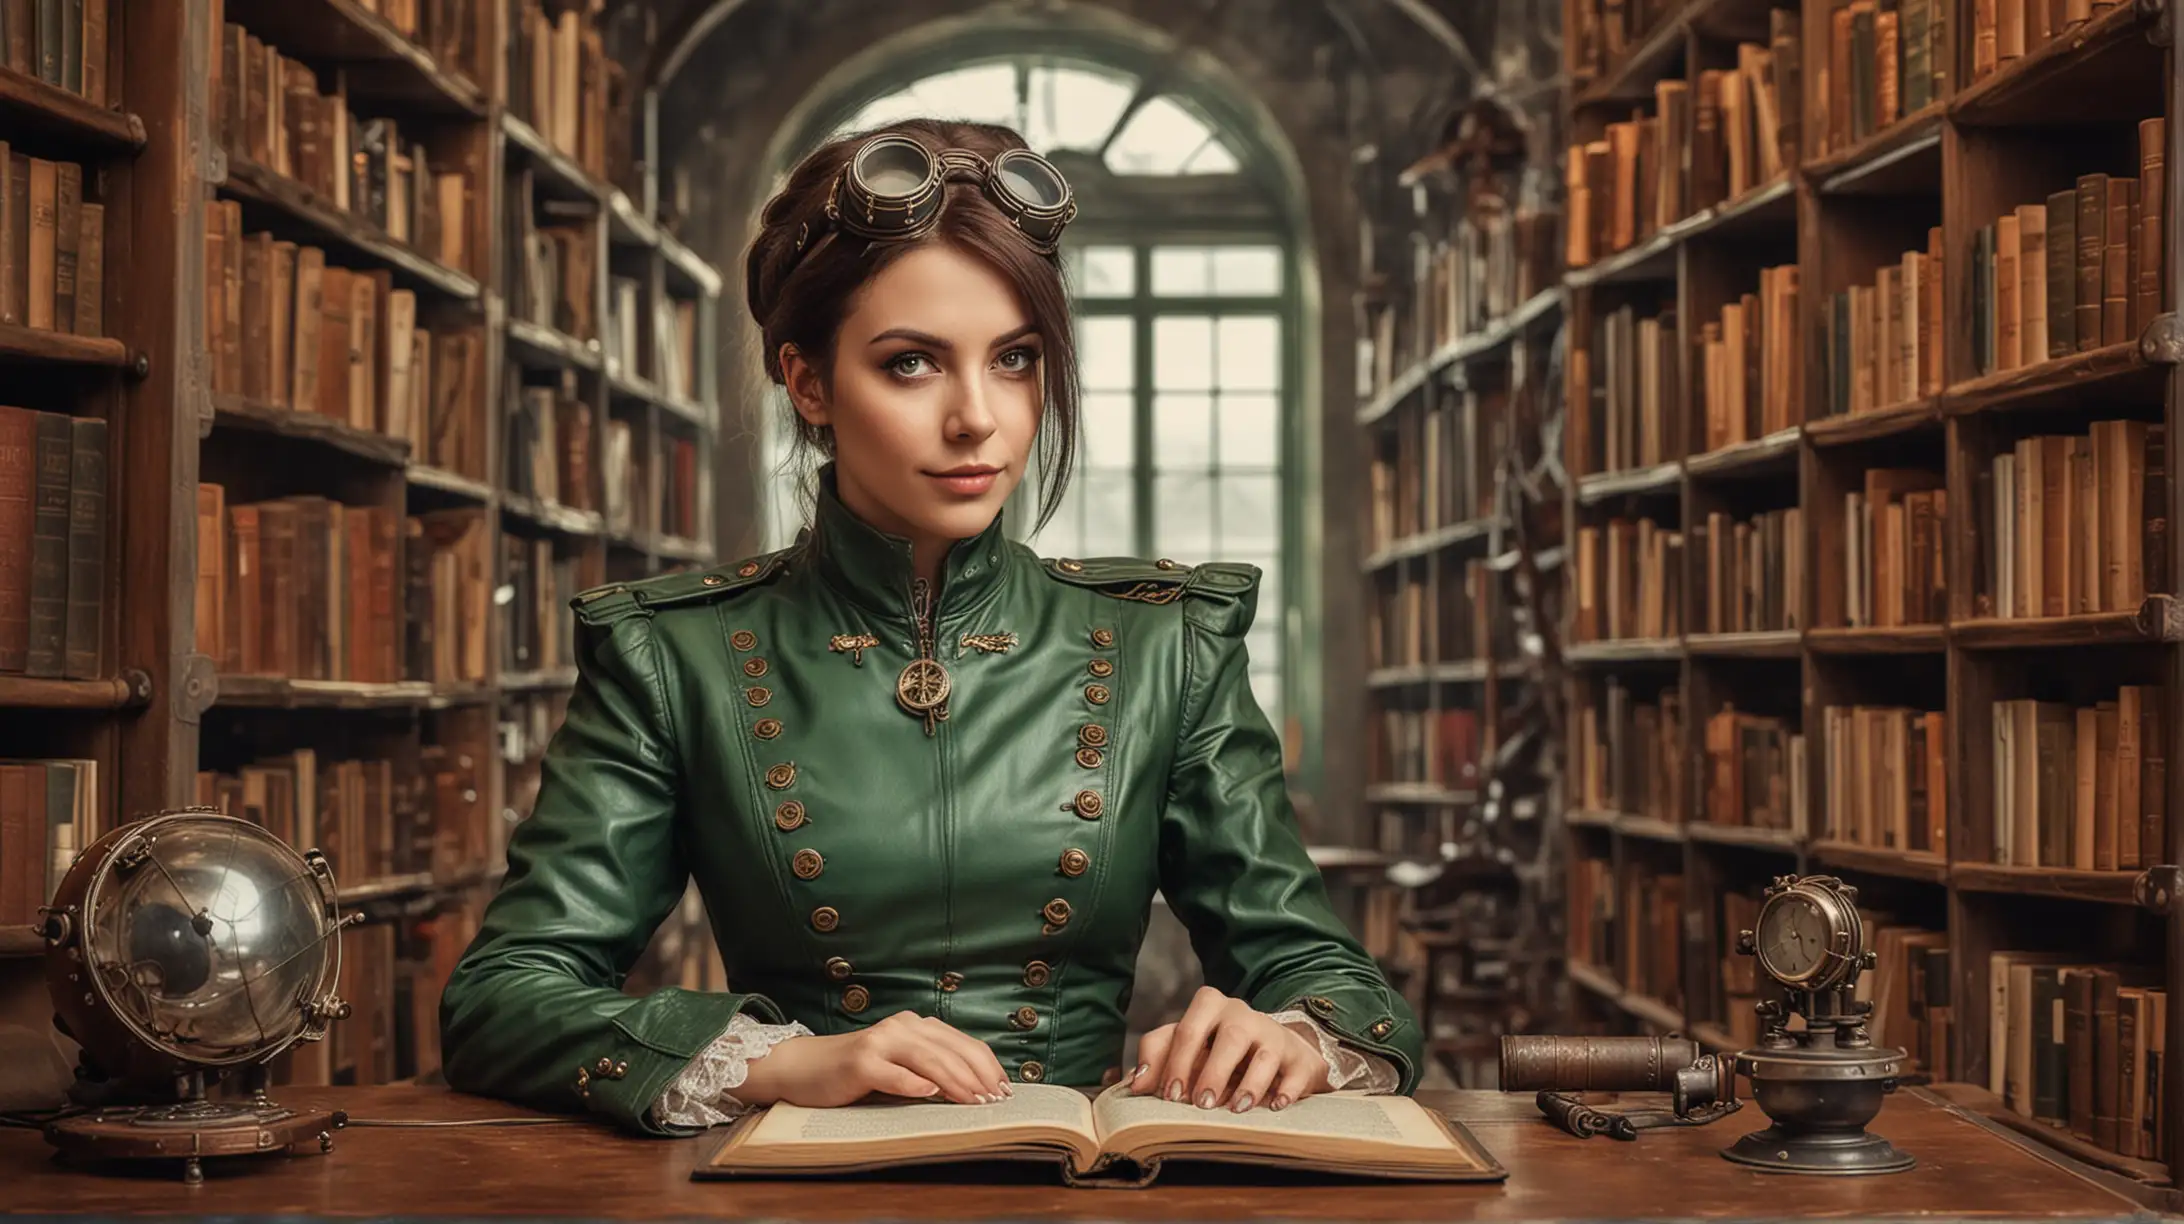 Happy Steampunk Woman Reading in Leather Green Uniform Amid Library Bookshelves